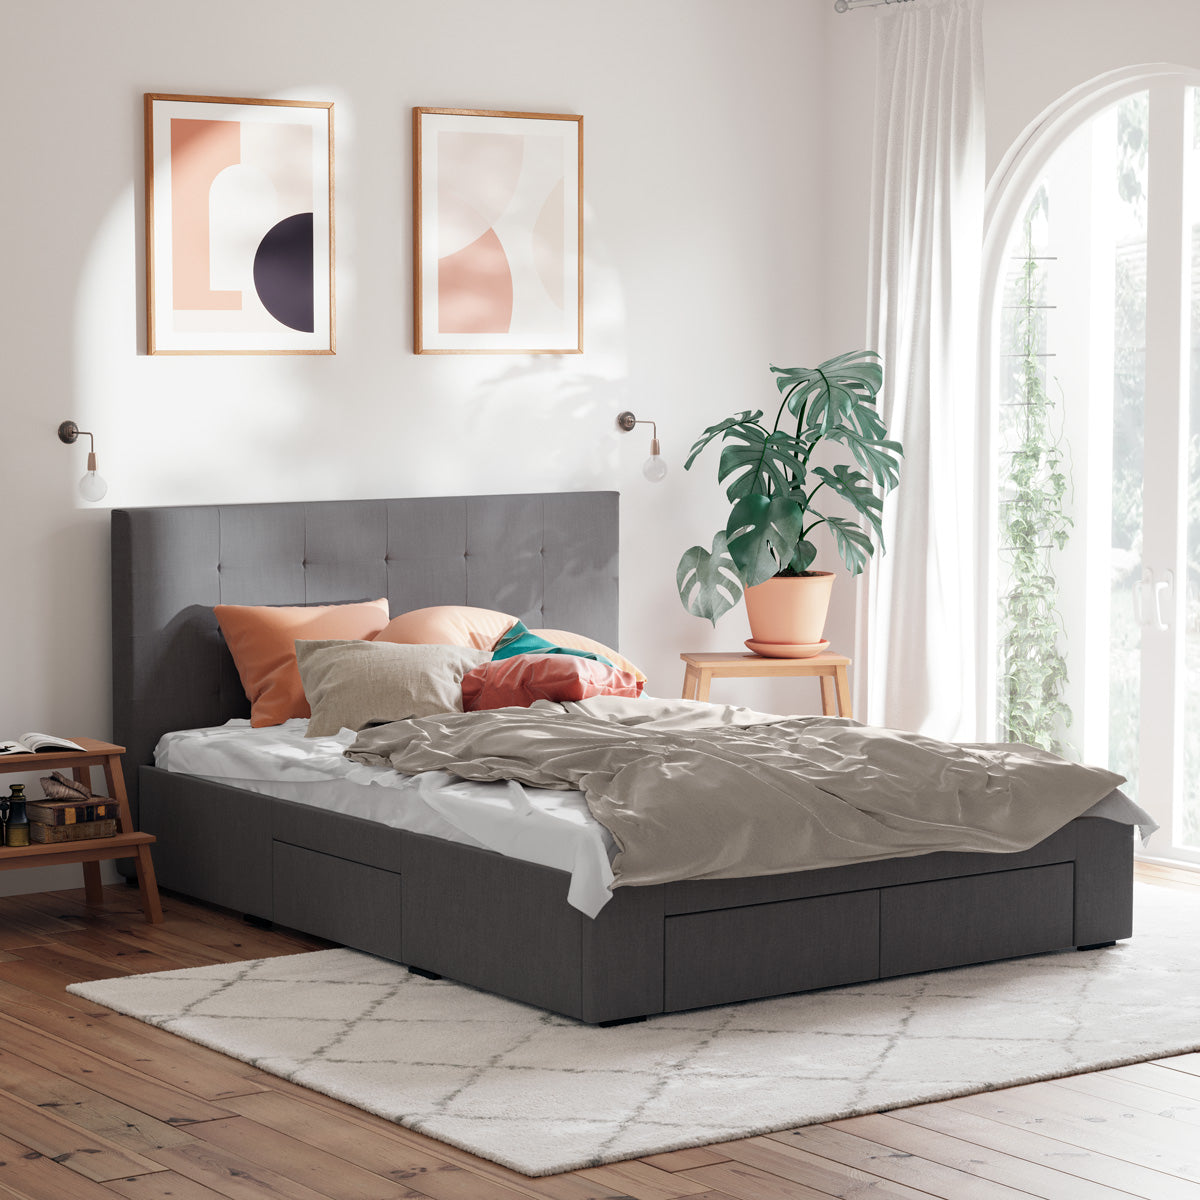 Charcoal Audrey Storage Bed Frame with Heston Bedside Tables Package